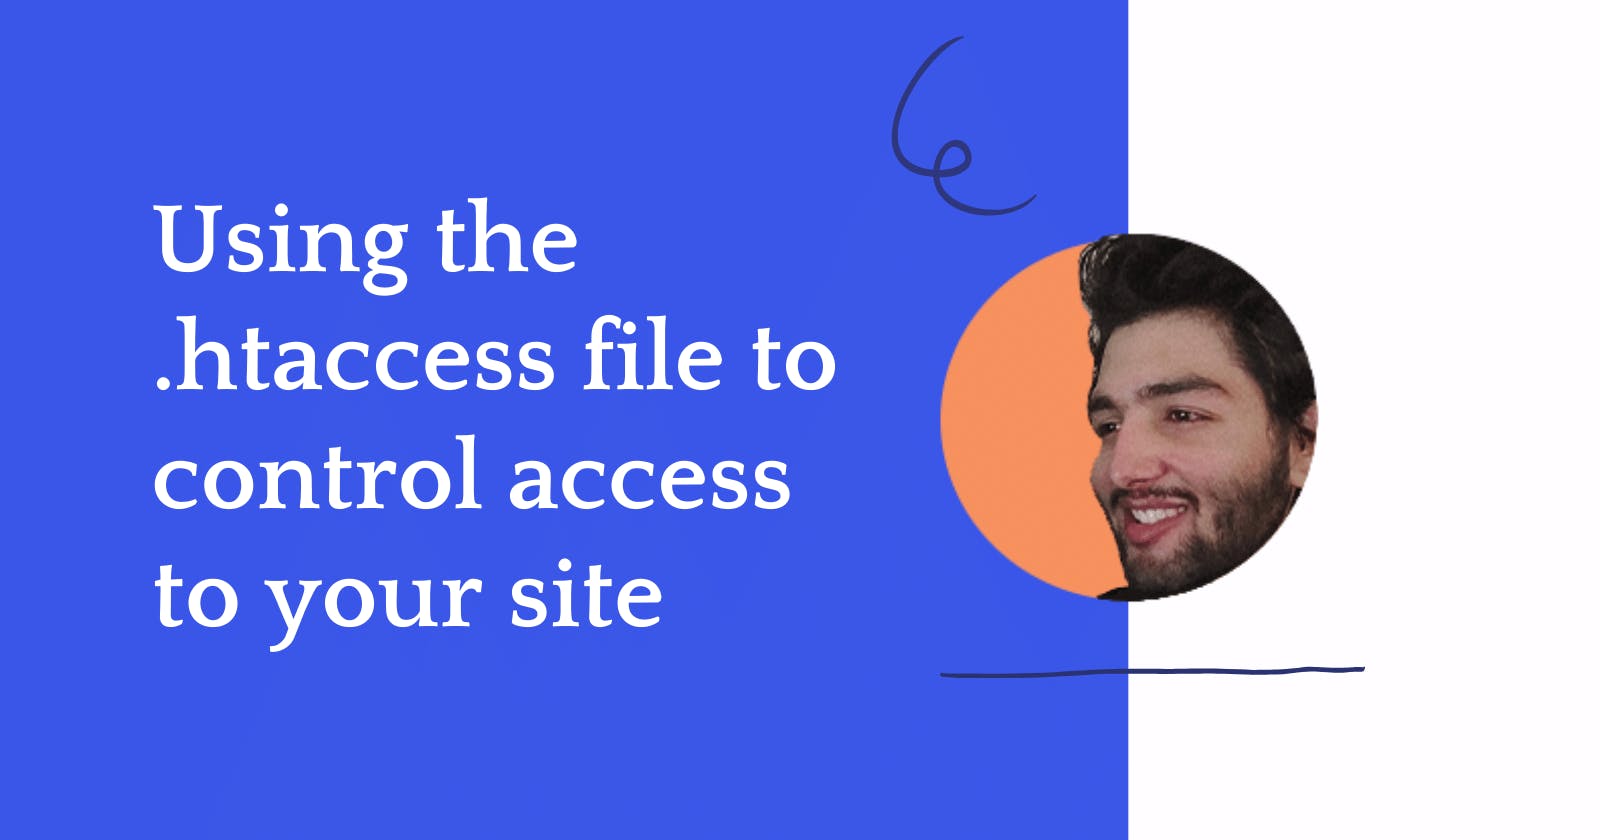 Using the .htaccess file to control access to your site